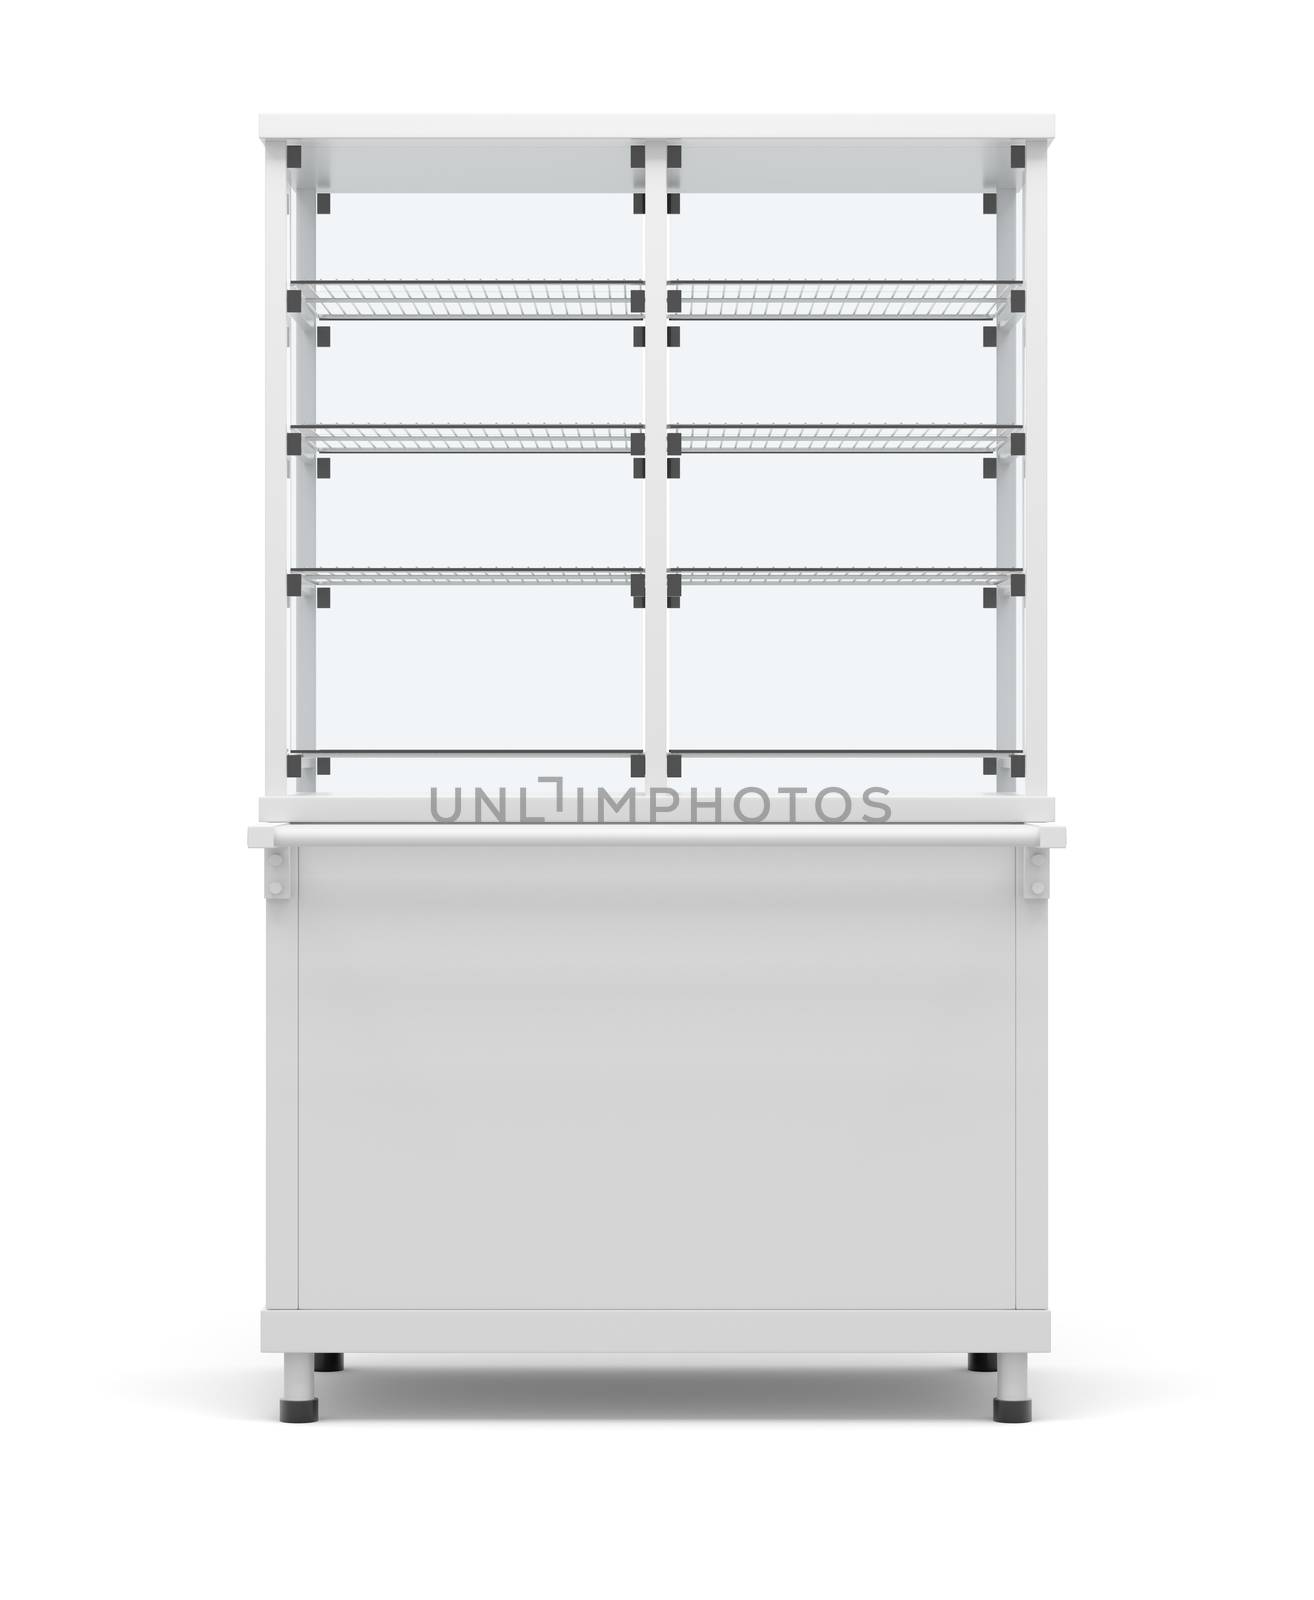 Showcase refrigeration. Front view, isolated on white background. 3D illustration